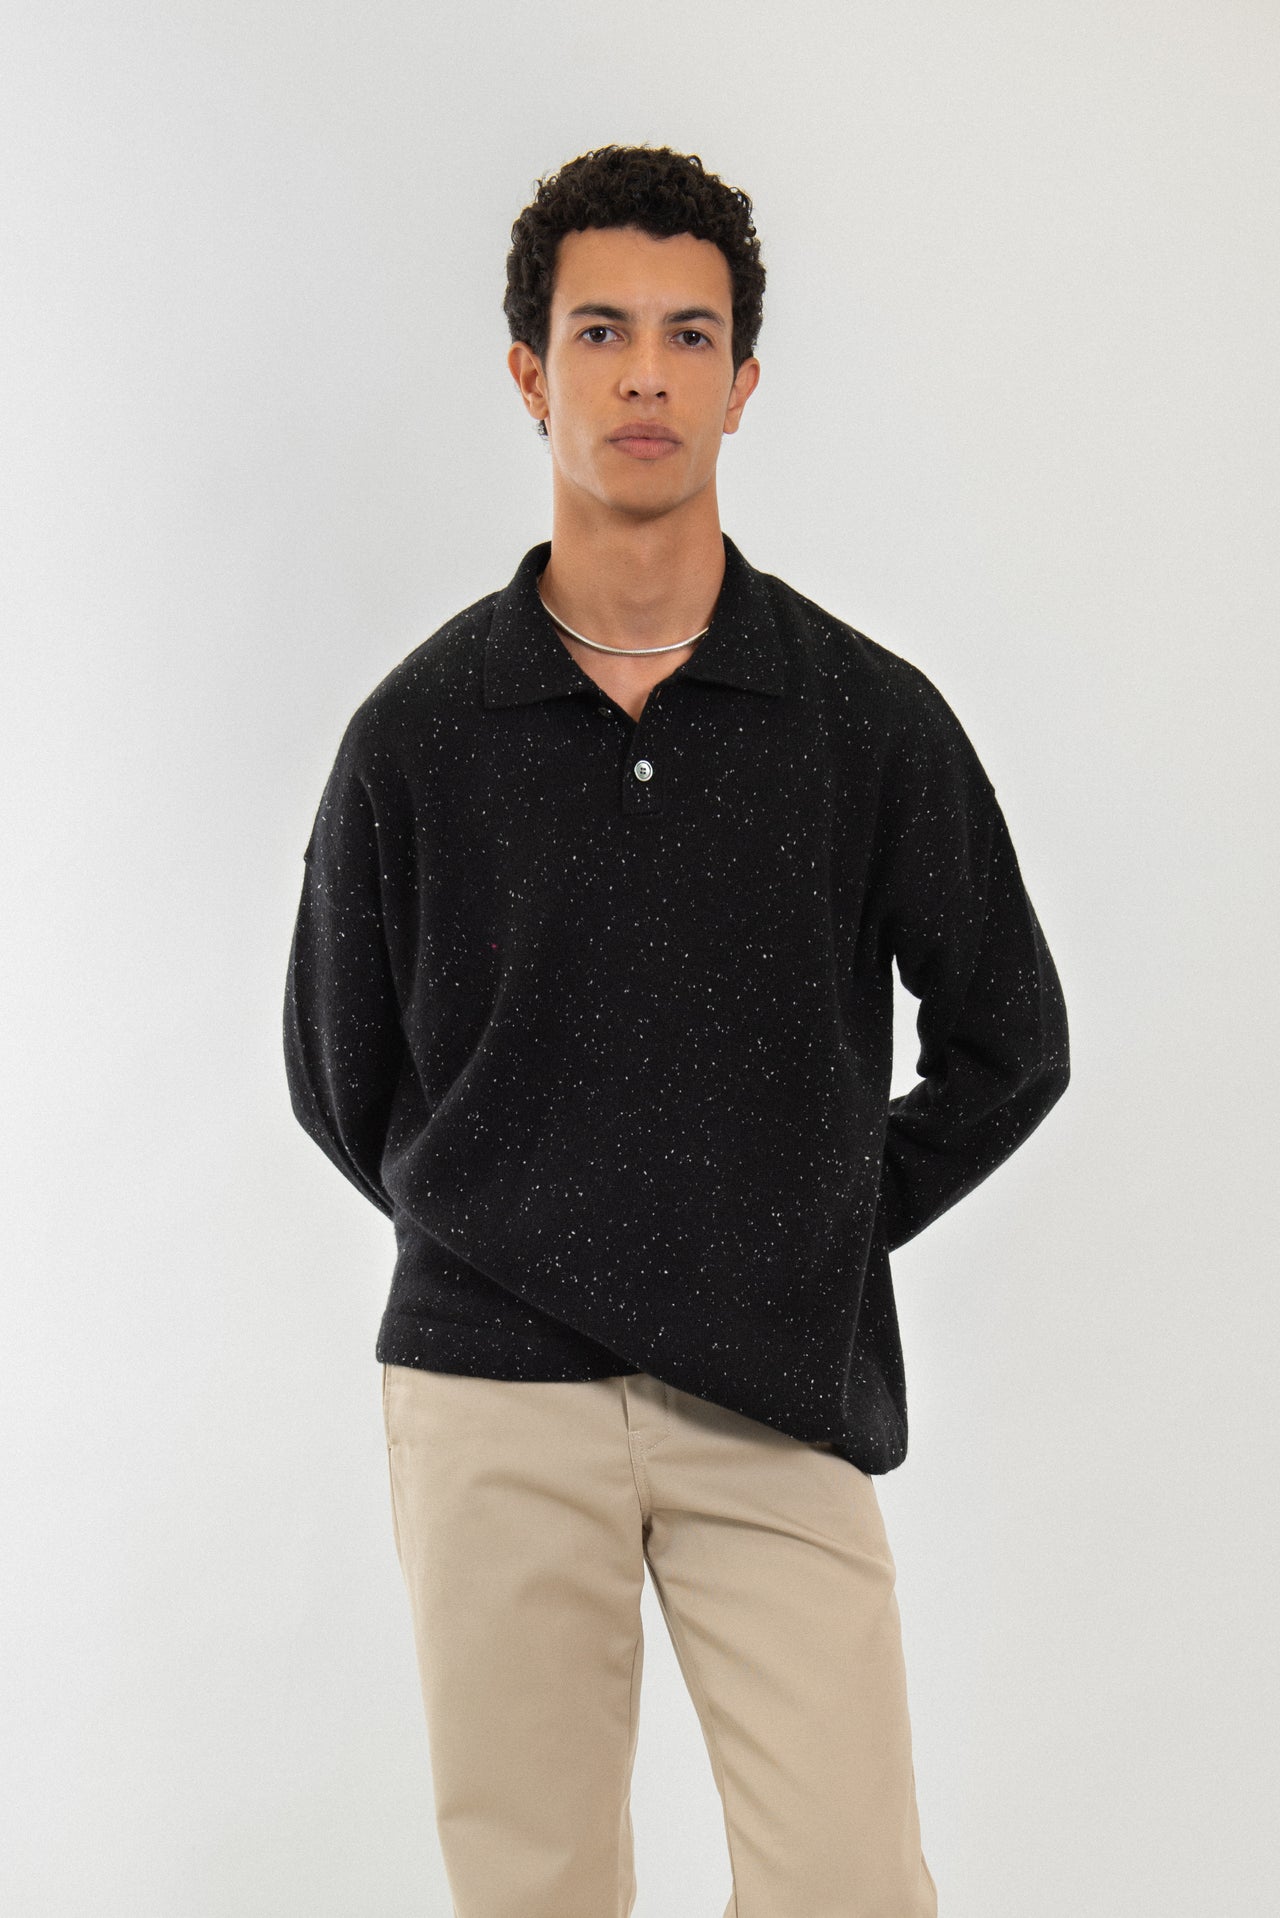 100% Cashmere Donegal polo sweater